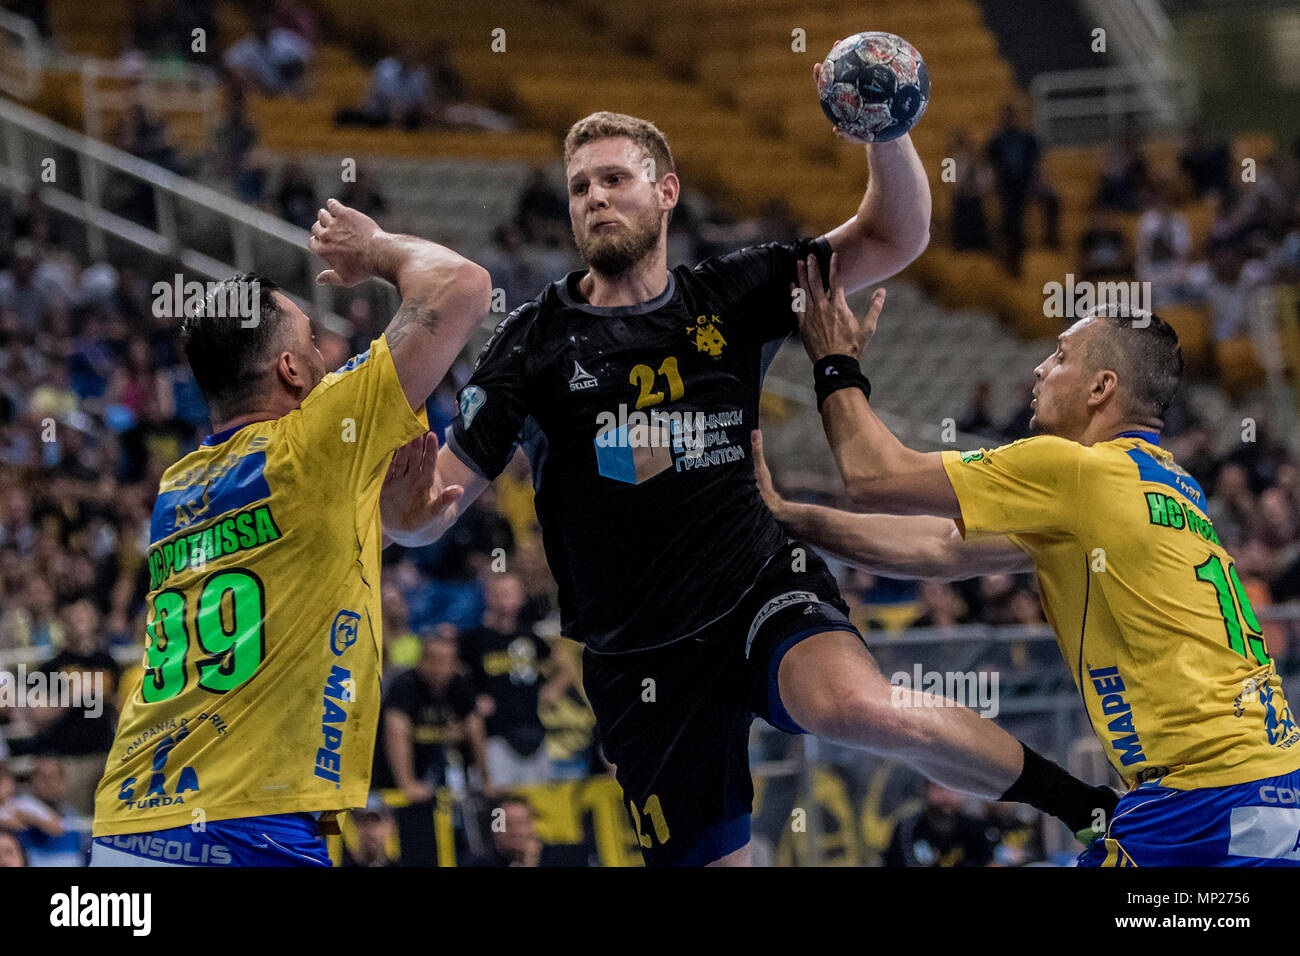 Athens, Greece. 20th May, 2018. A.E.K.'s Jonas Lokken (C) competes during  the EHF Men's Challenge Cup Finals between A.E.K. Athens and AHC Potaissa  Turda in Athens, Greece, May 20, 2018. Credit: Panagiotis